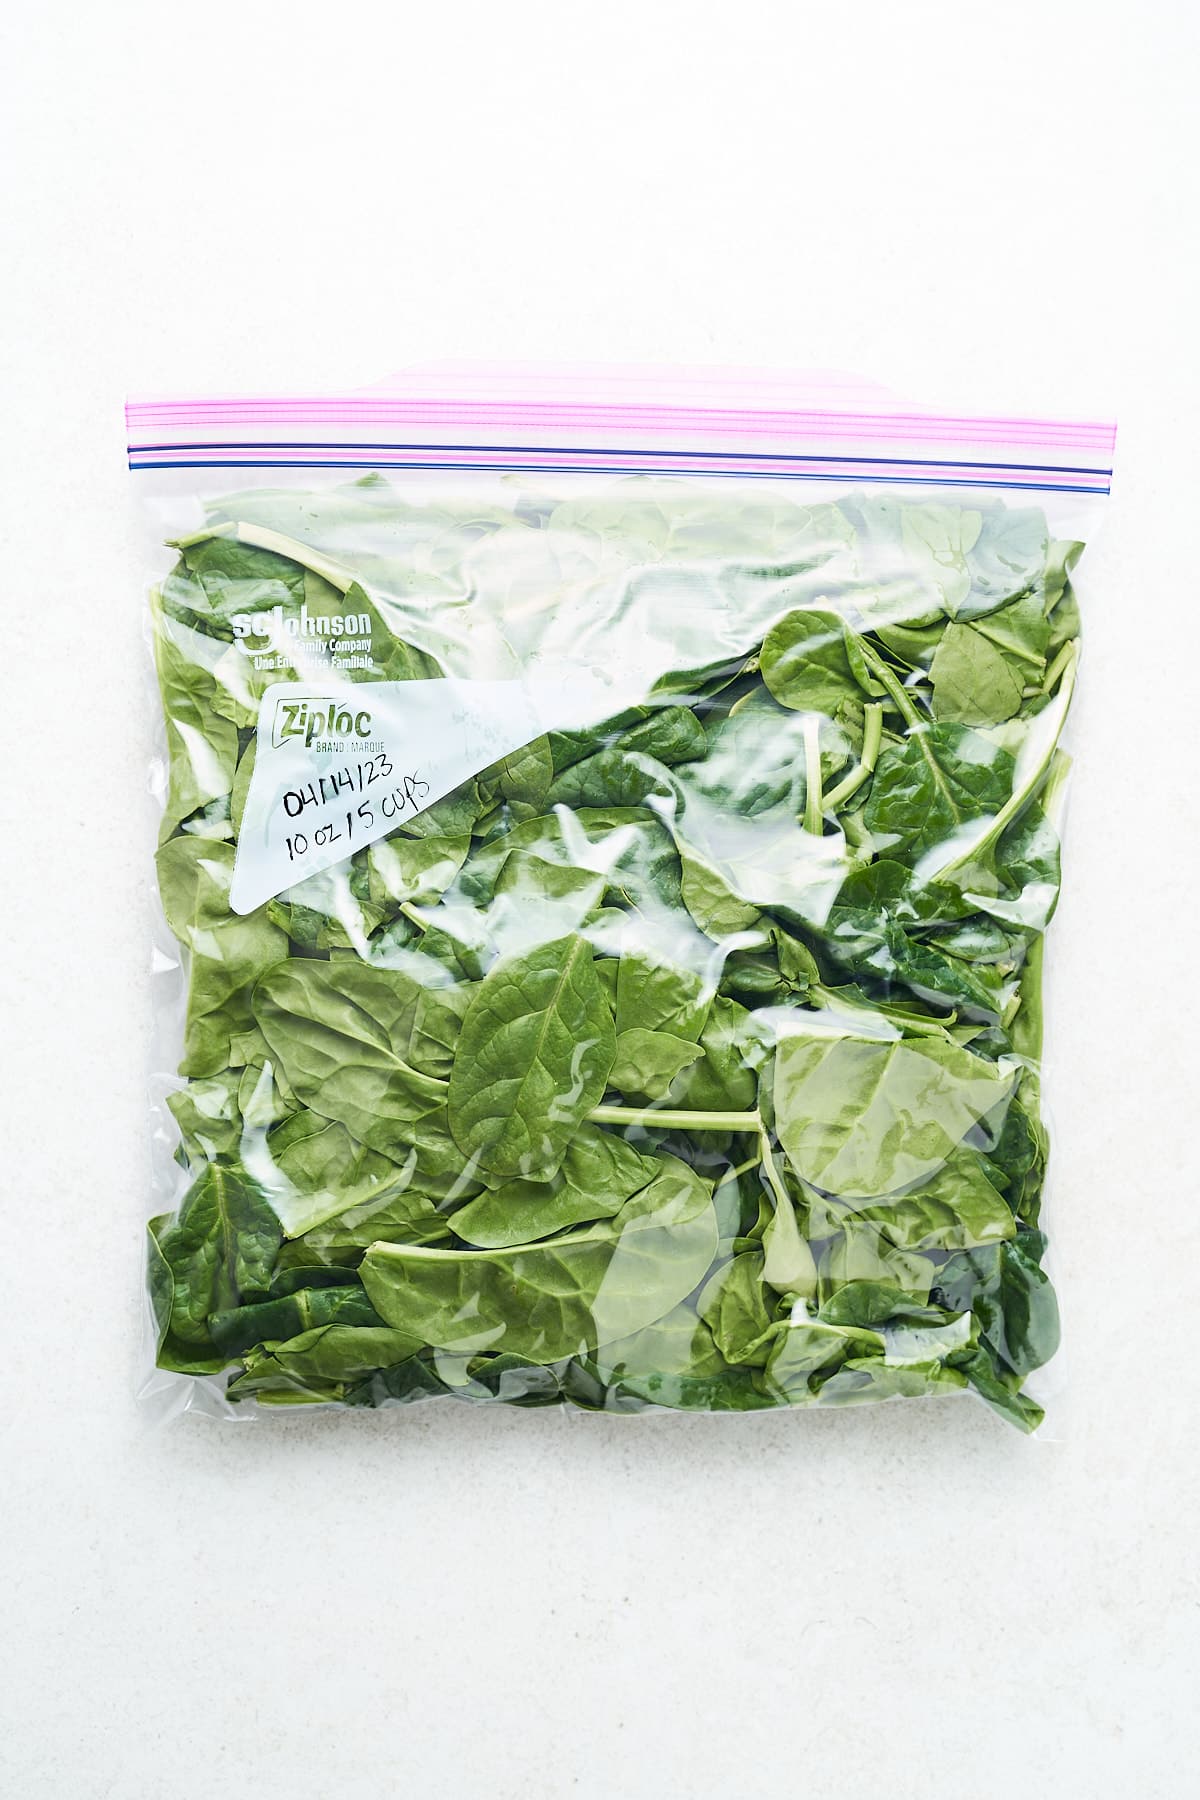 Spinach leaves in a bag.